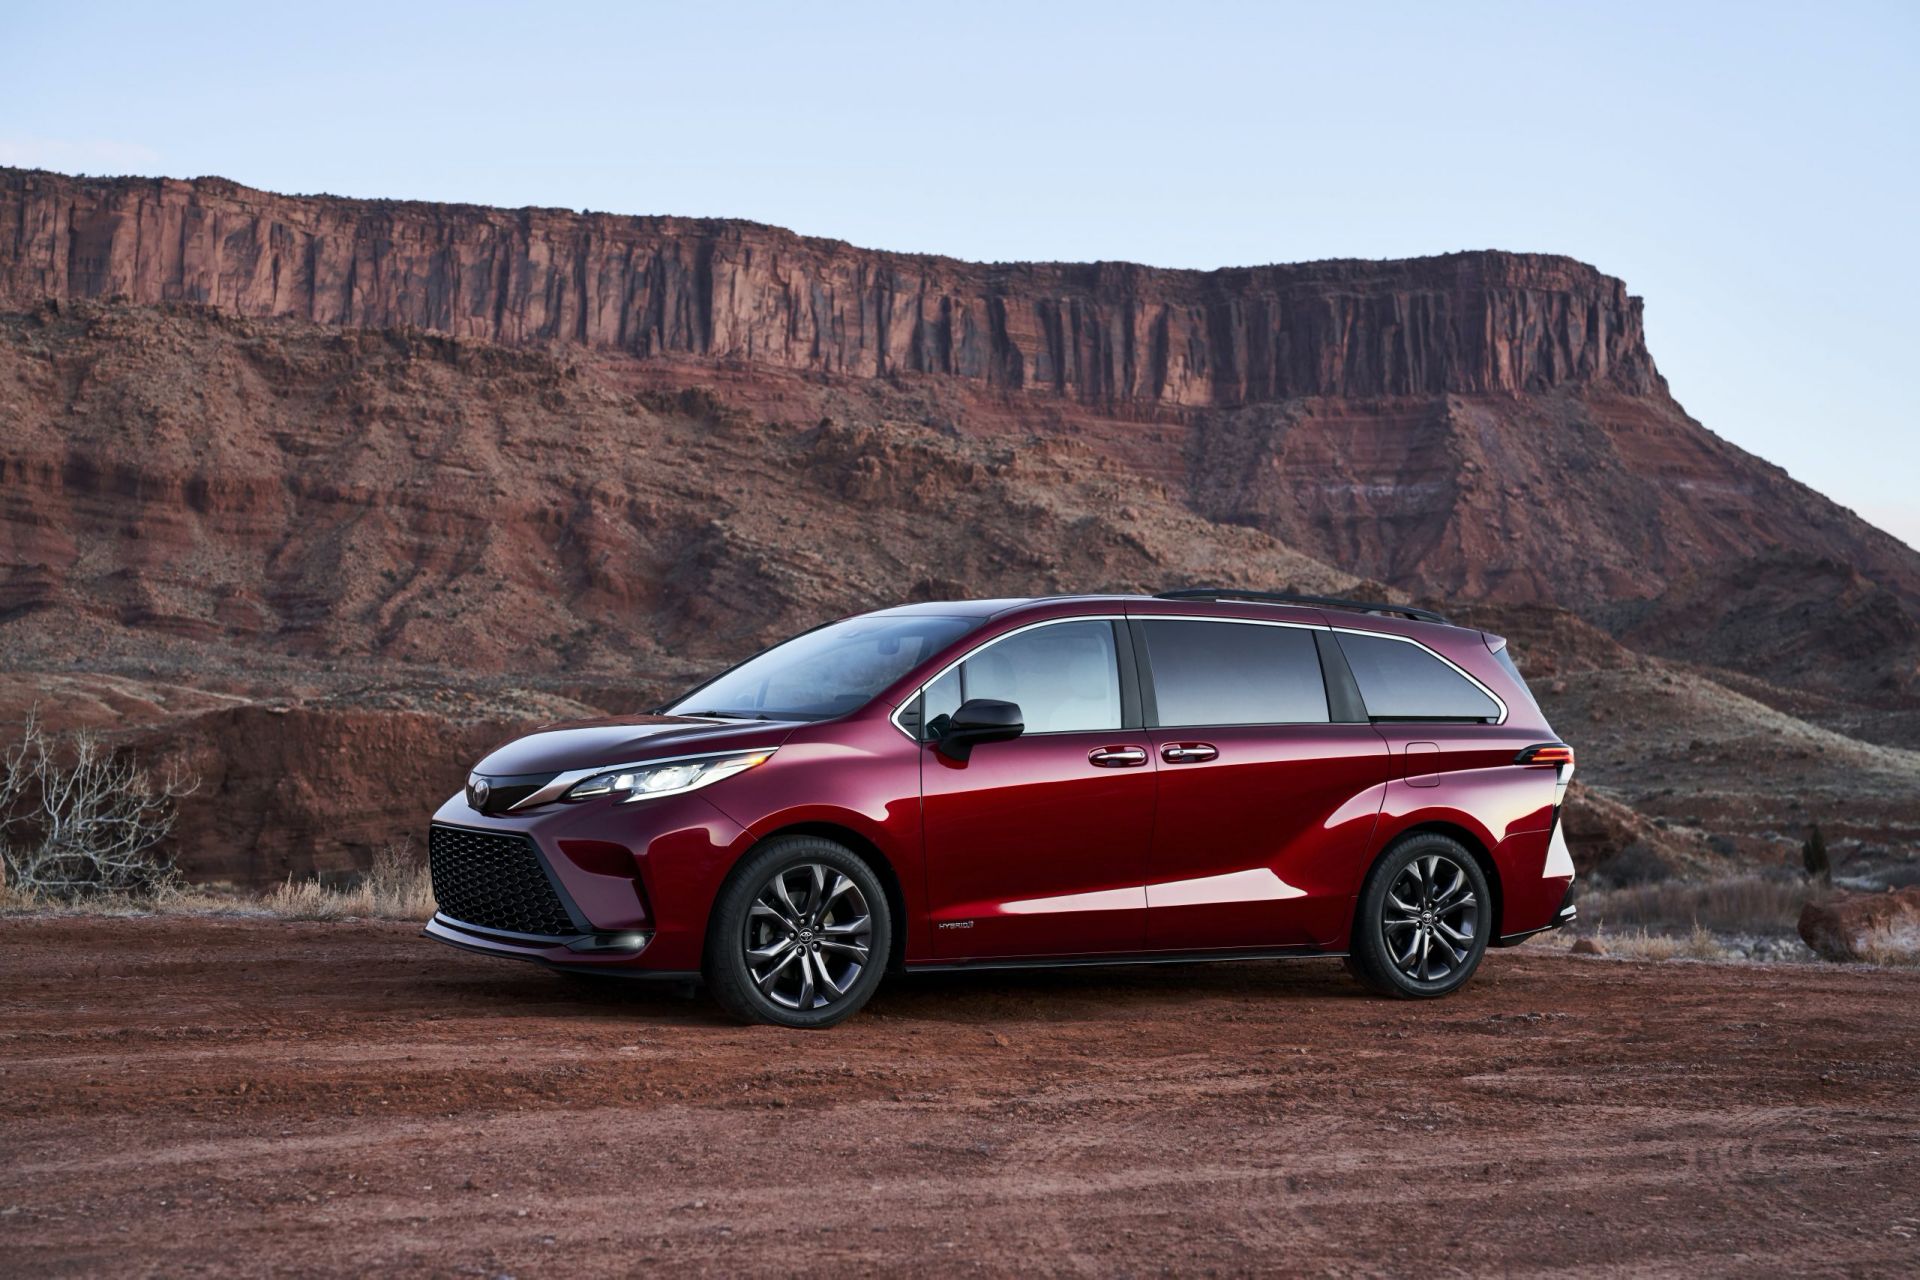 2021 Toyota Sienna Starting Price Announced, It’s 2,820 More Expensive